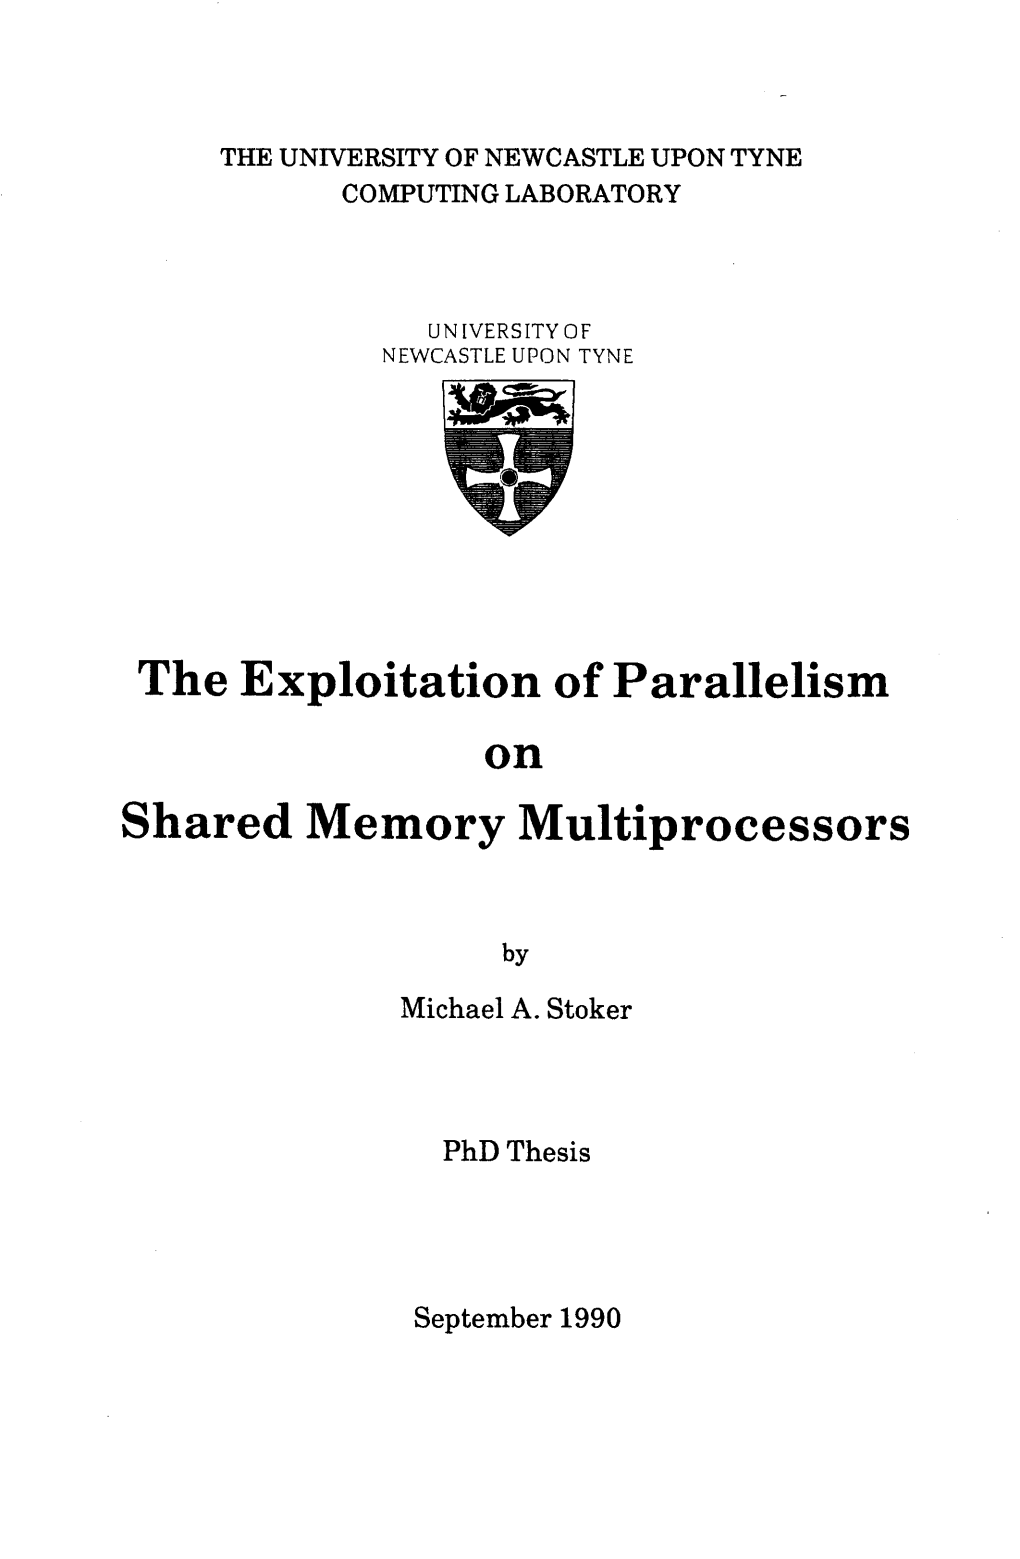 The Exploitation of Parallelism on Shared Memory Multiprocessors